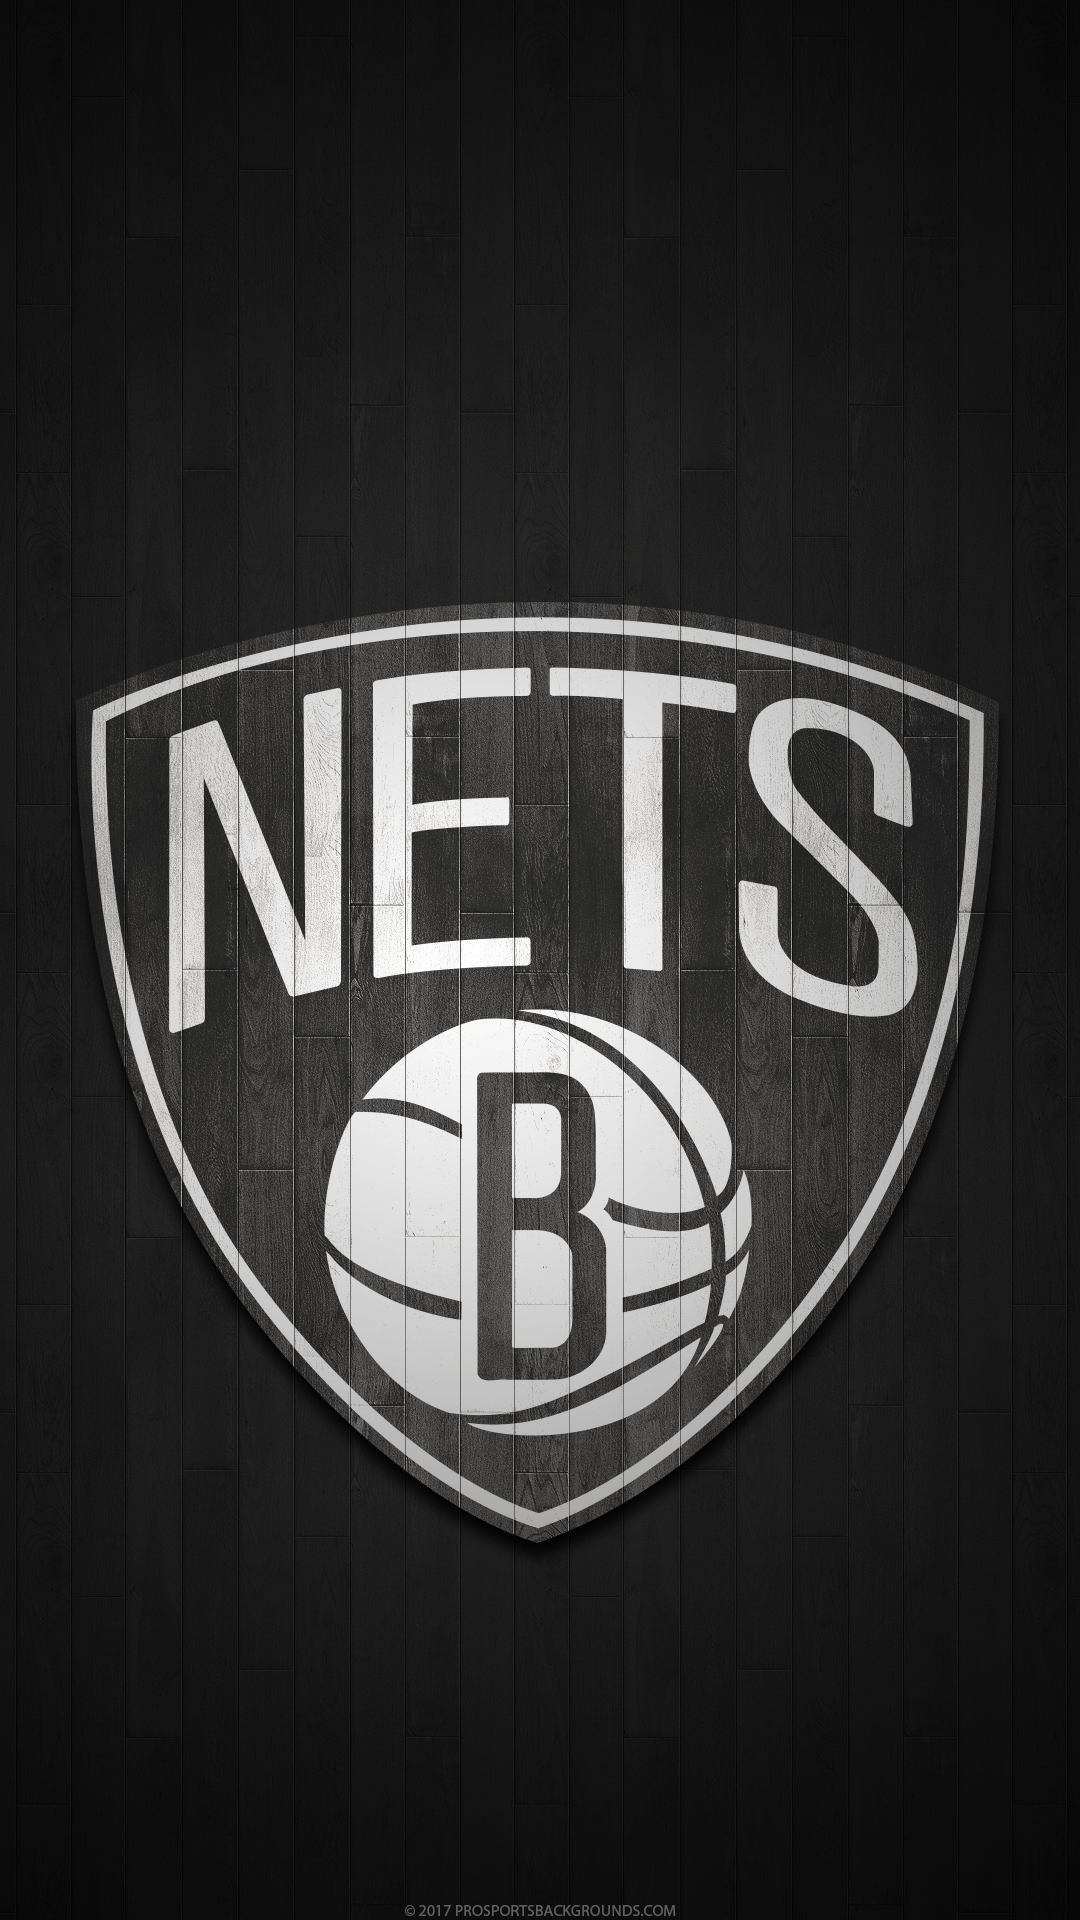 Brooklyn Nets Wallpaper. iPhone. Android